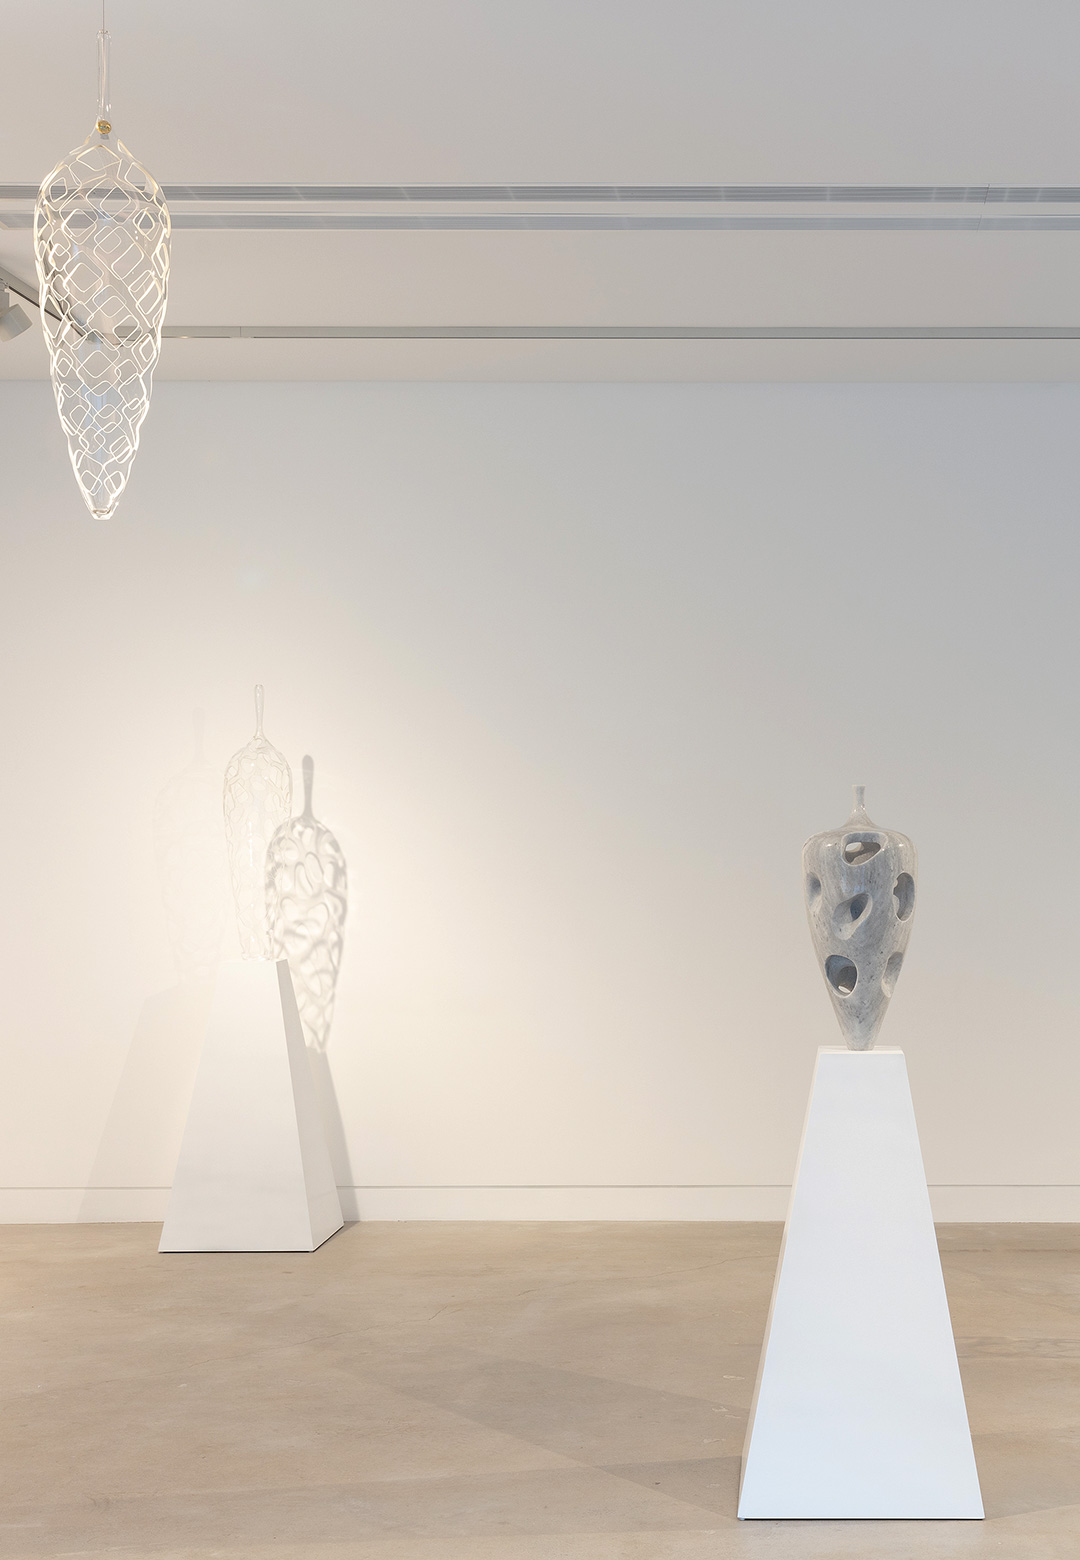 Yusuke Takemura's 'Connectivity' meditates on mind-body dualism with glass sculptures